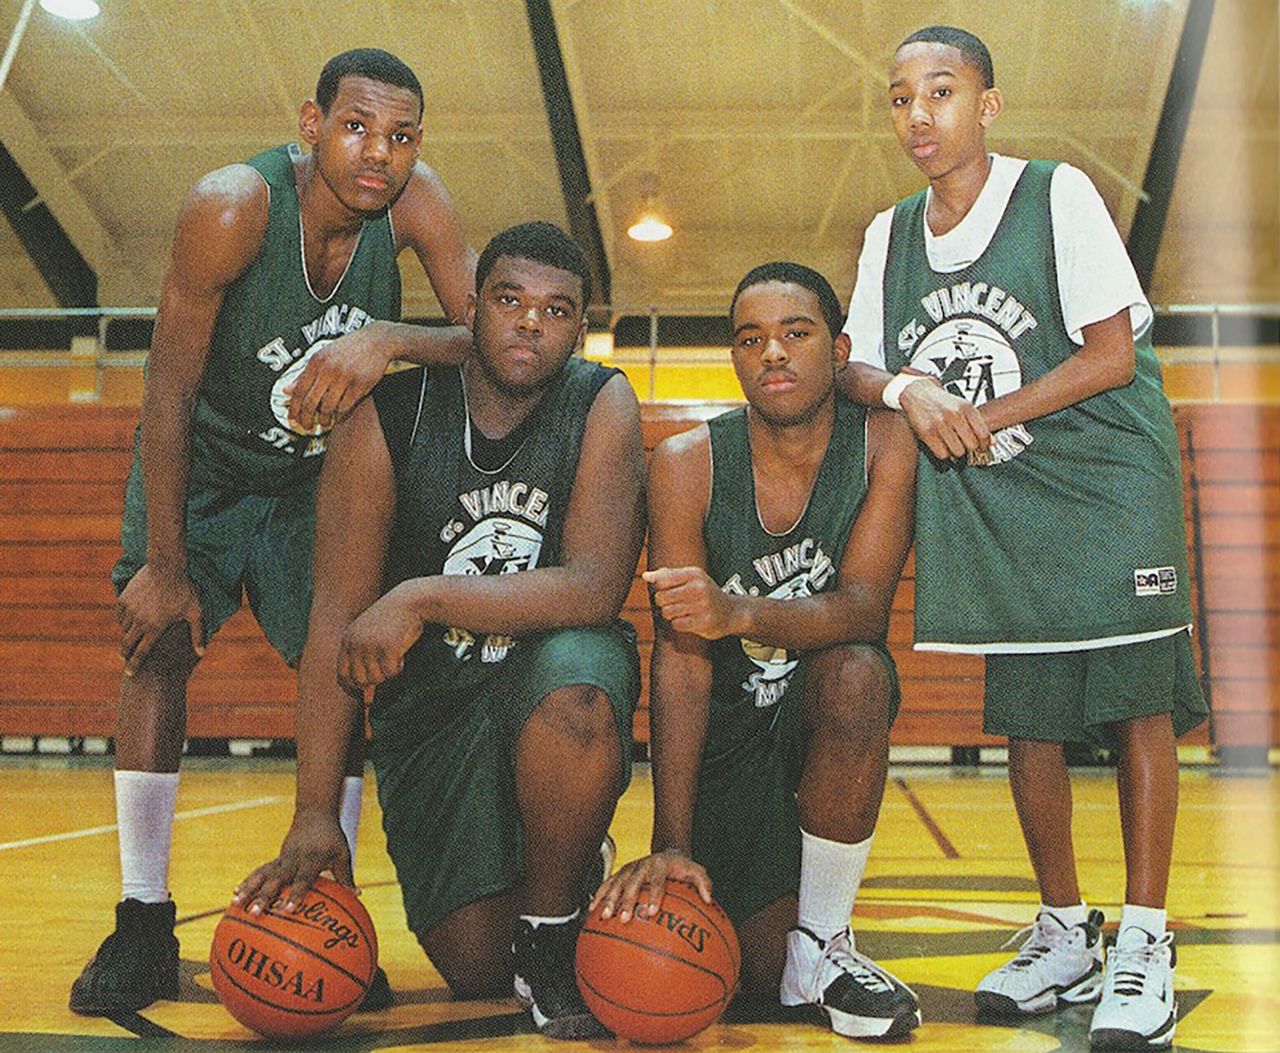 James, left, poses with some of his teammates at St. Vincent-St. Mary High School during his freshman year.